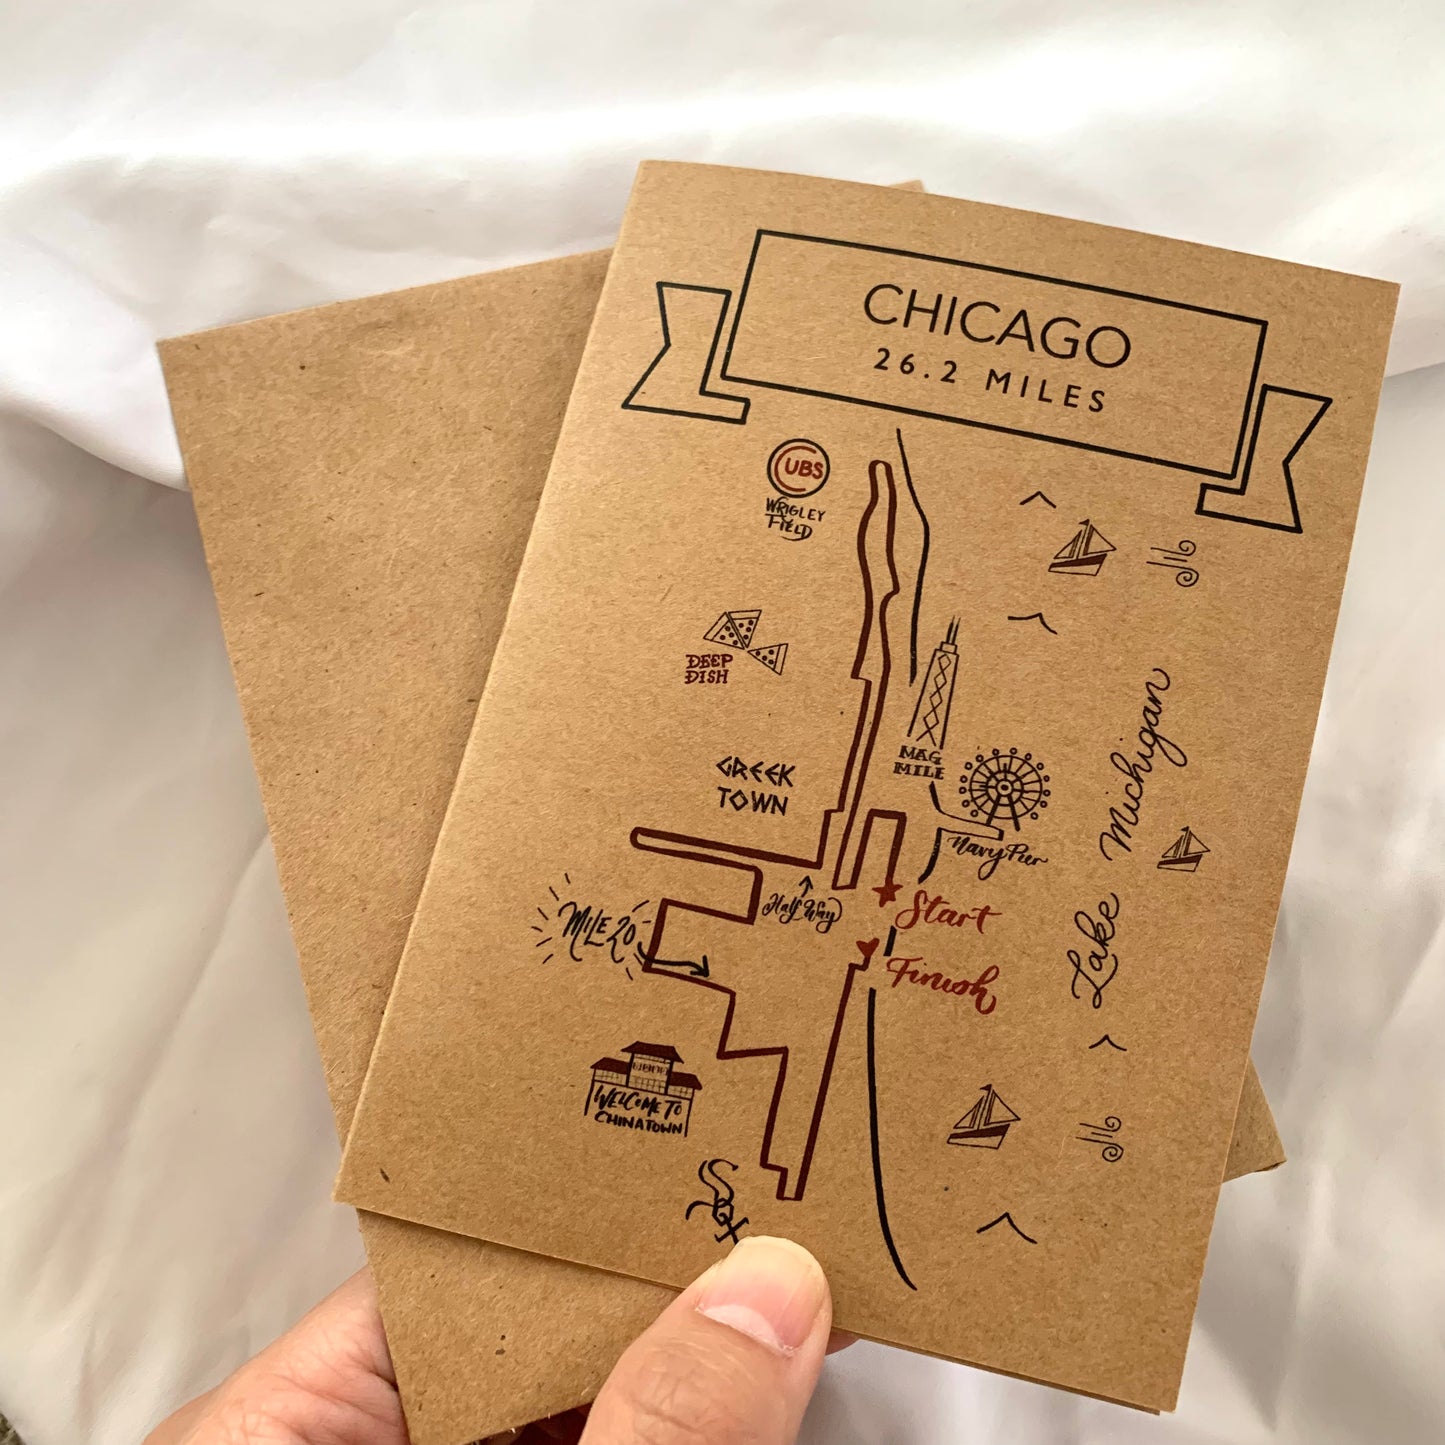 Chicago 26.2 card, Kraft paper Chicago 26.2 map card, Chicago 26.2 map art gift